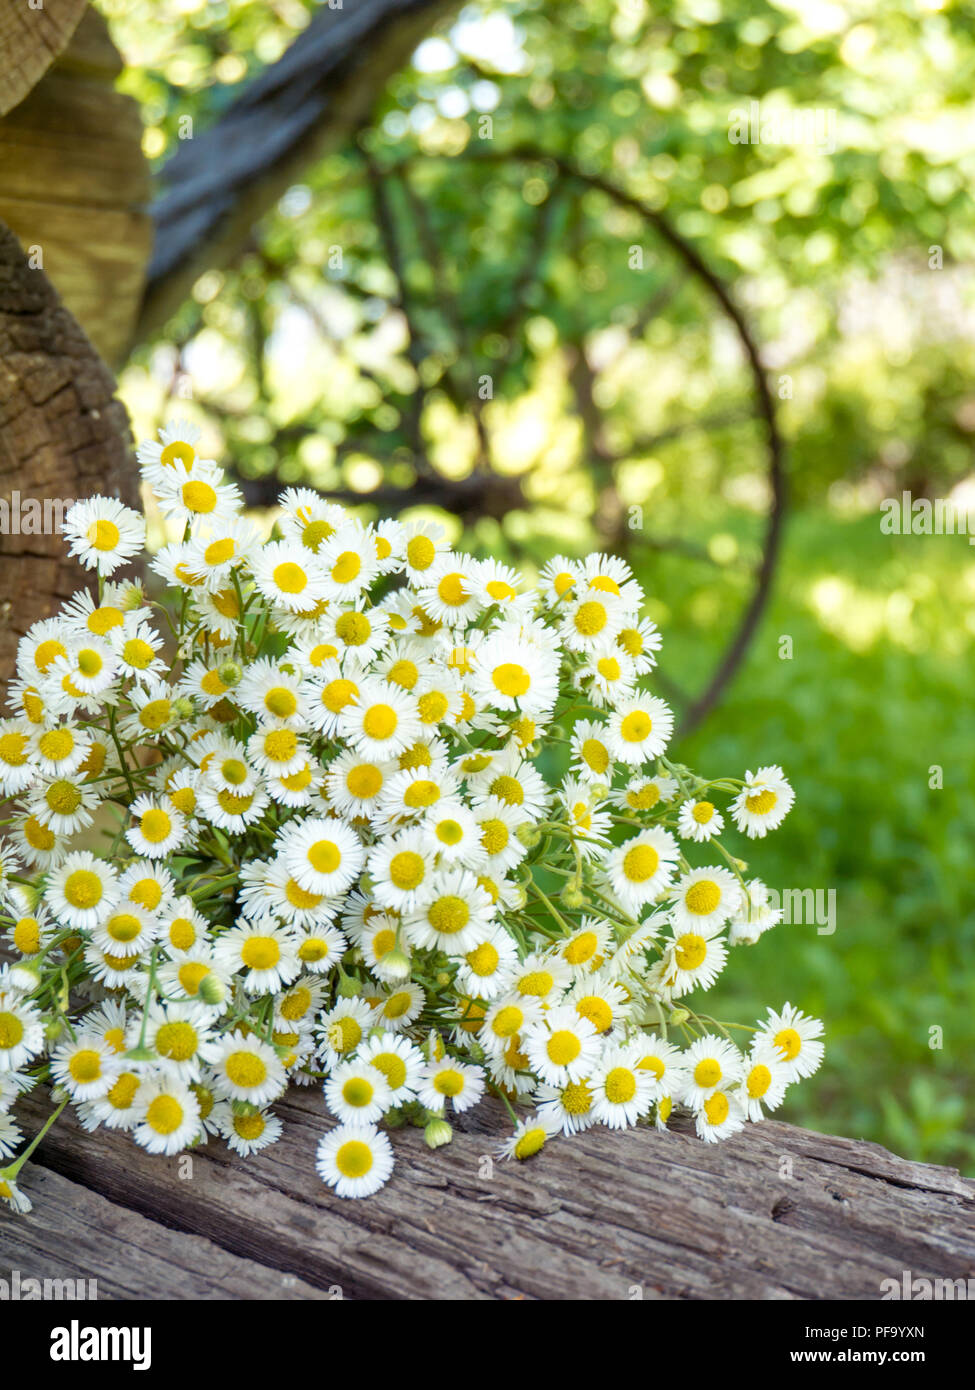 Daisy white yellow-eye flowers on the summer blurred rustic garden vertical background Stock Photo